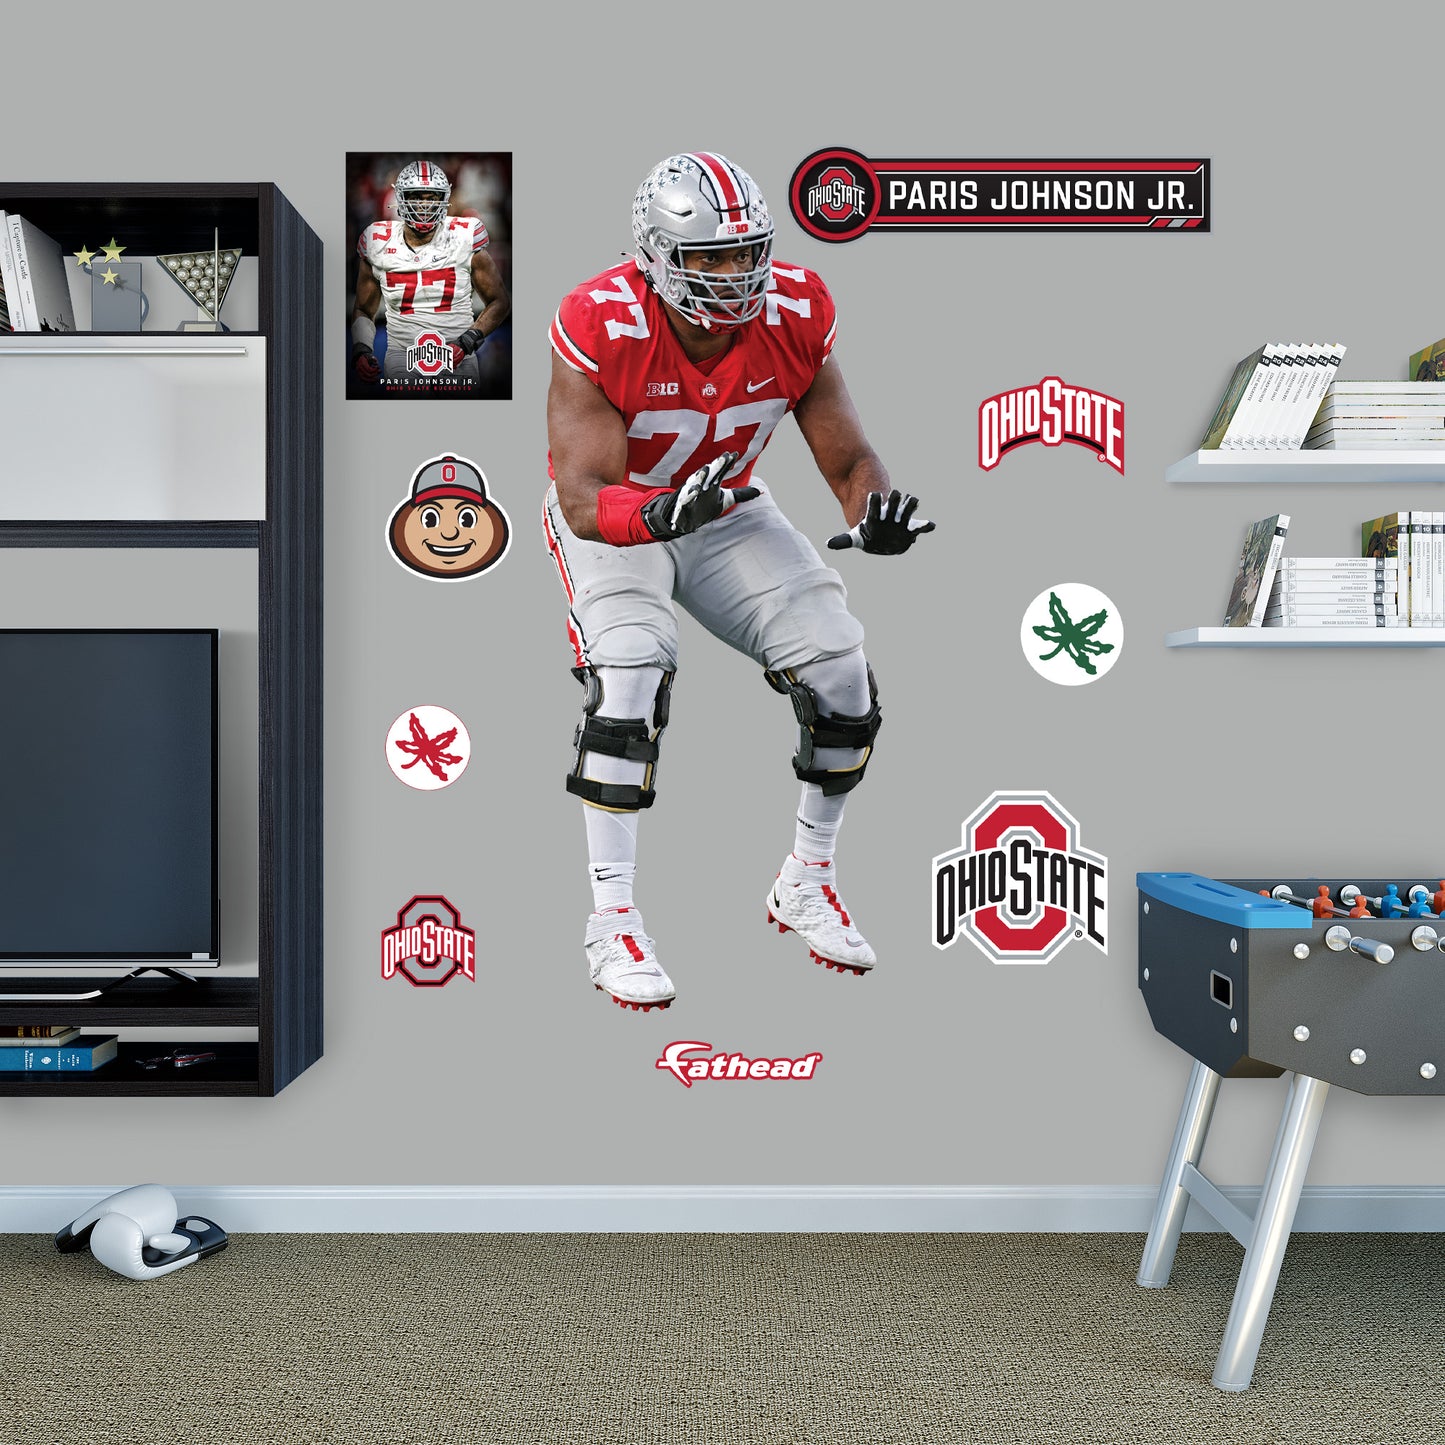 Ohio State Buckeyes: Paris Johnson Jr.         - Officially Licensed NCAA Removable     Adhesive Decal